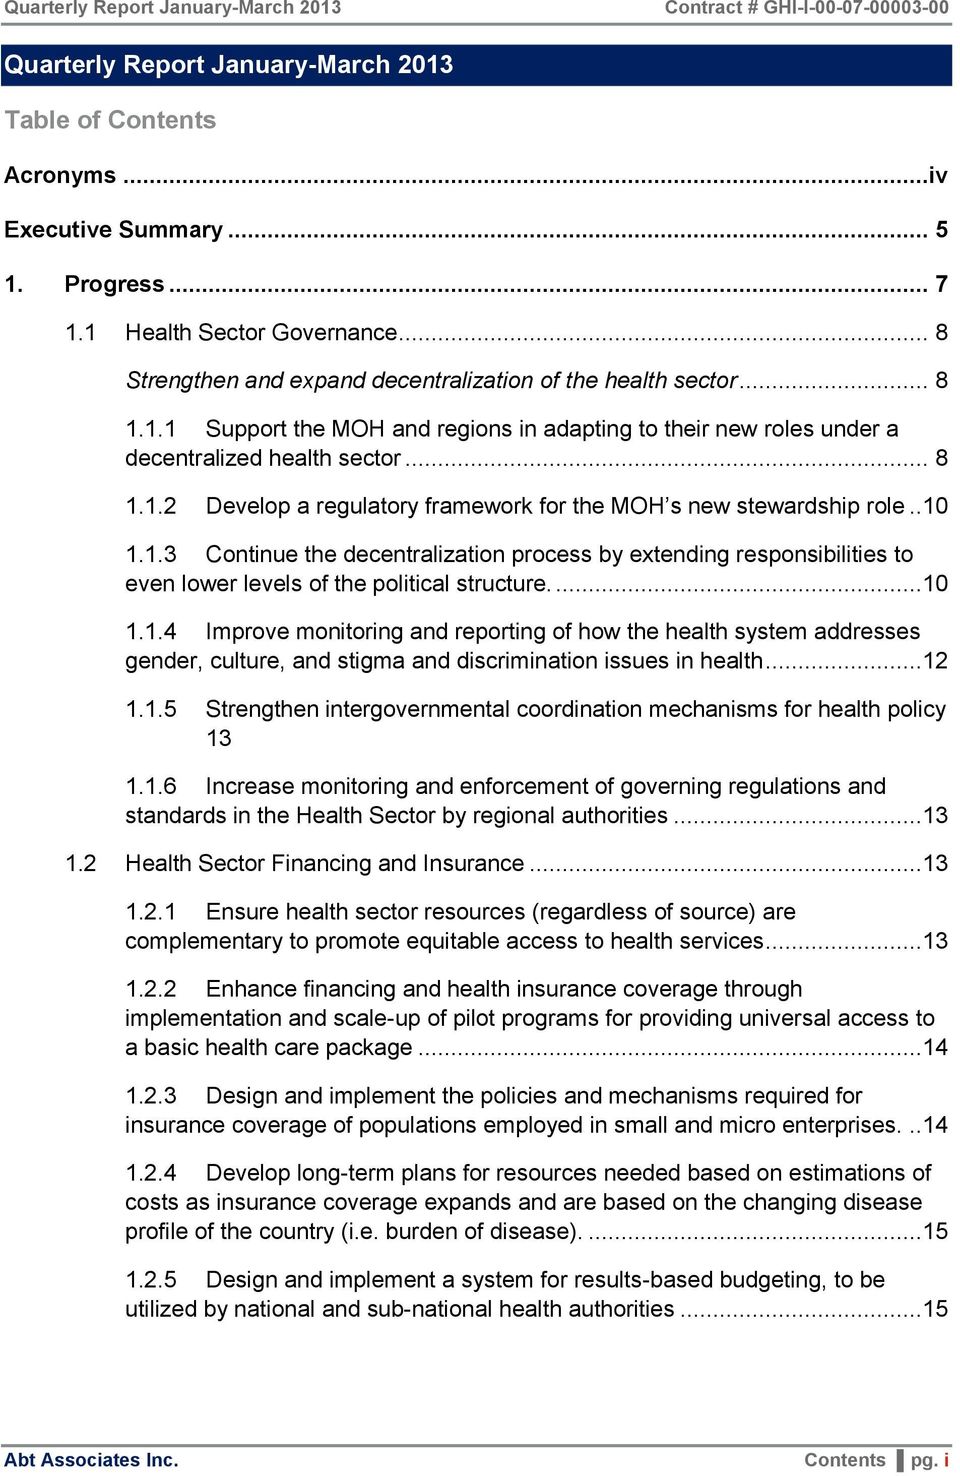 ...10 1.1.4 Improve monitoring and reporting of how the health system addresses gender, culture, and stigma and discrimination issues in health...12 1.1.5 Strengthen intergovernmental coordination mechanisms for health policy 13 1.